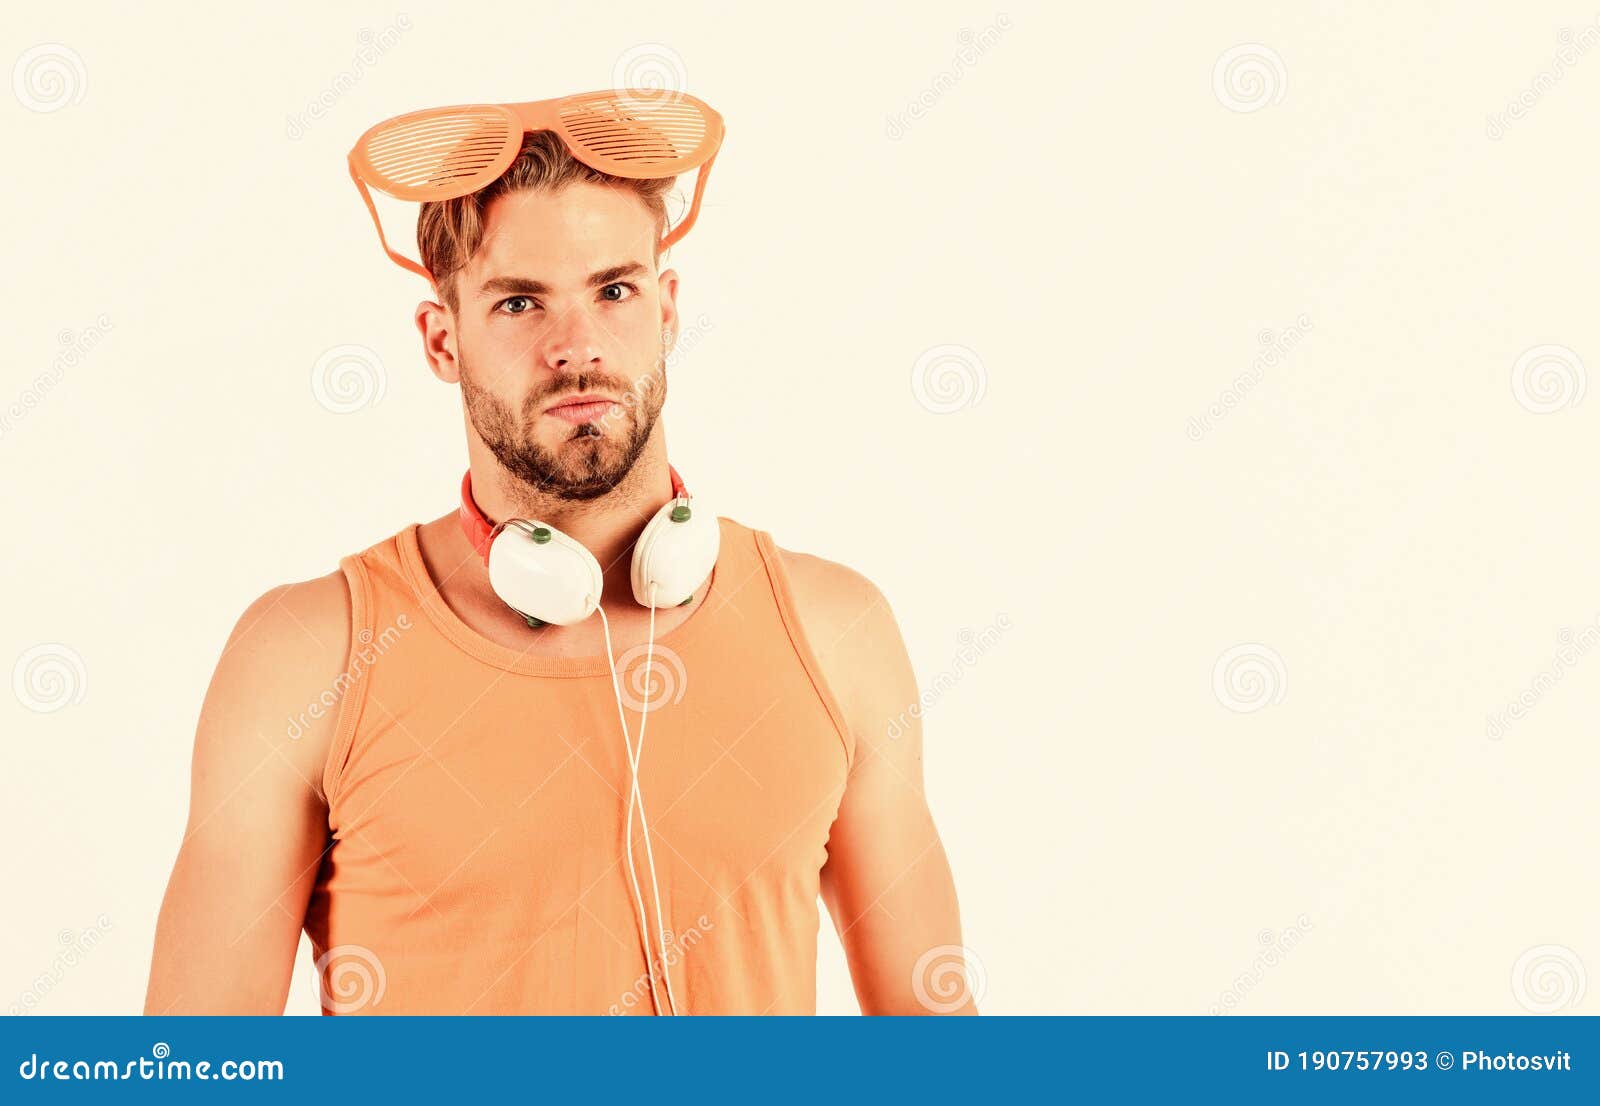 summer music chart. handsome man with headphones and sunglasses. guy unshaven face listening summer music. party concept